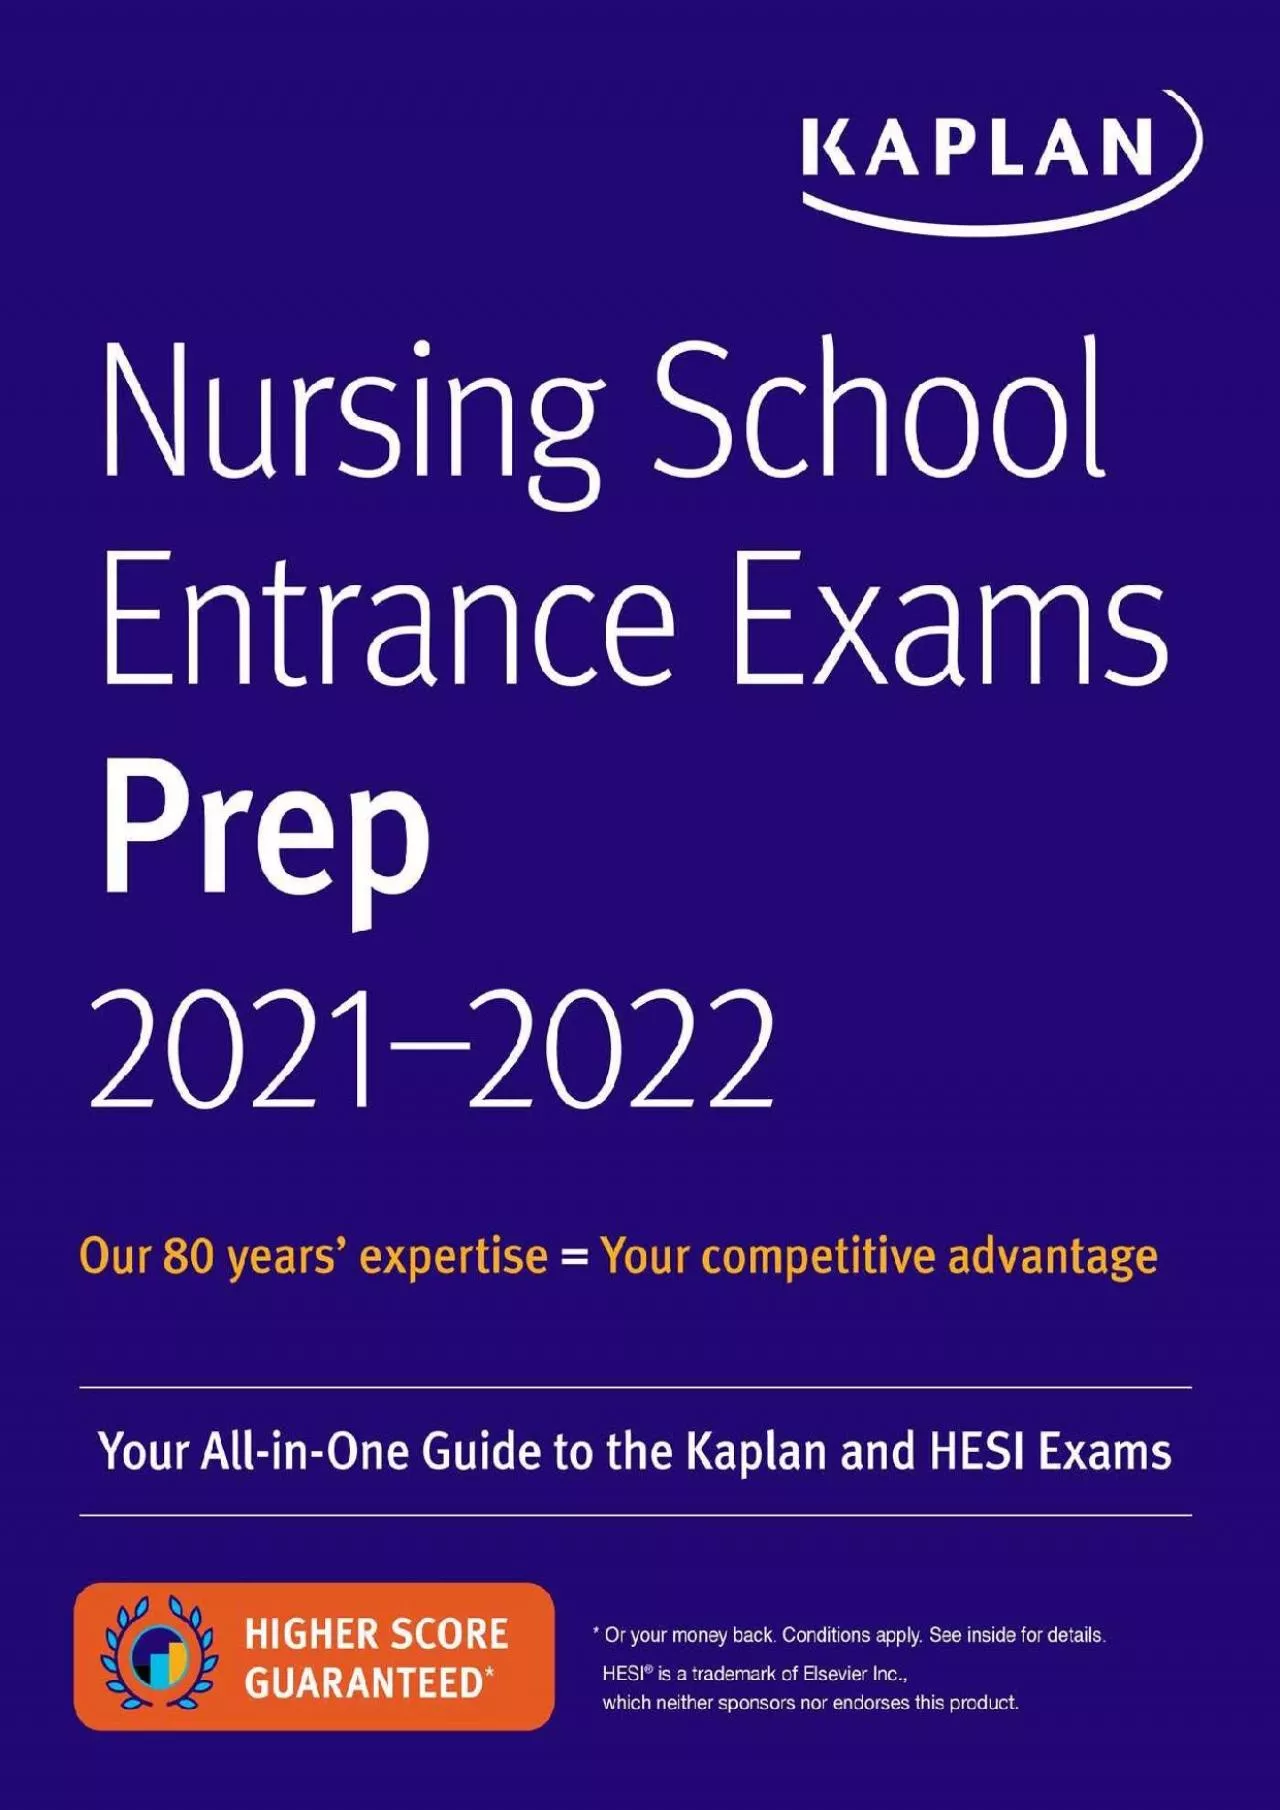 [READ] Nursing School Entrance Exams Prep 2021-2022: Your All-in-One Guide to the Kaplan